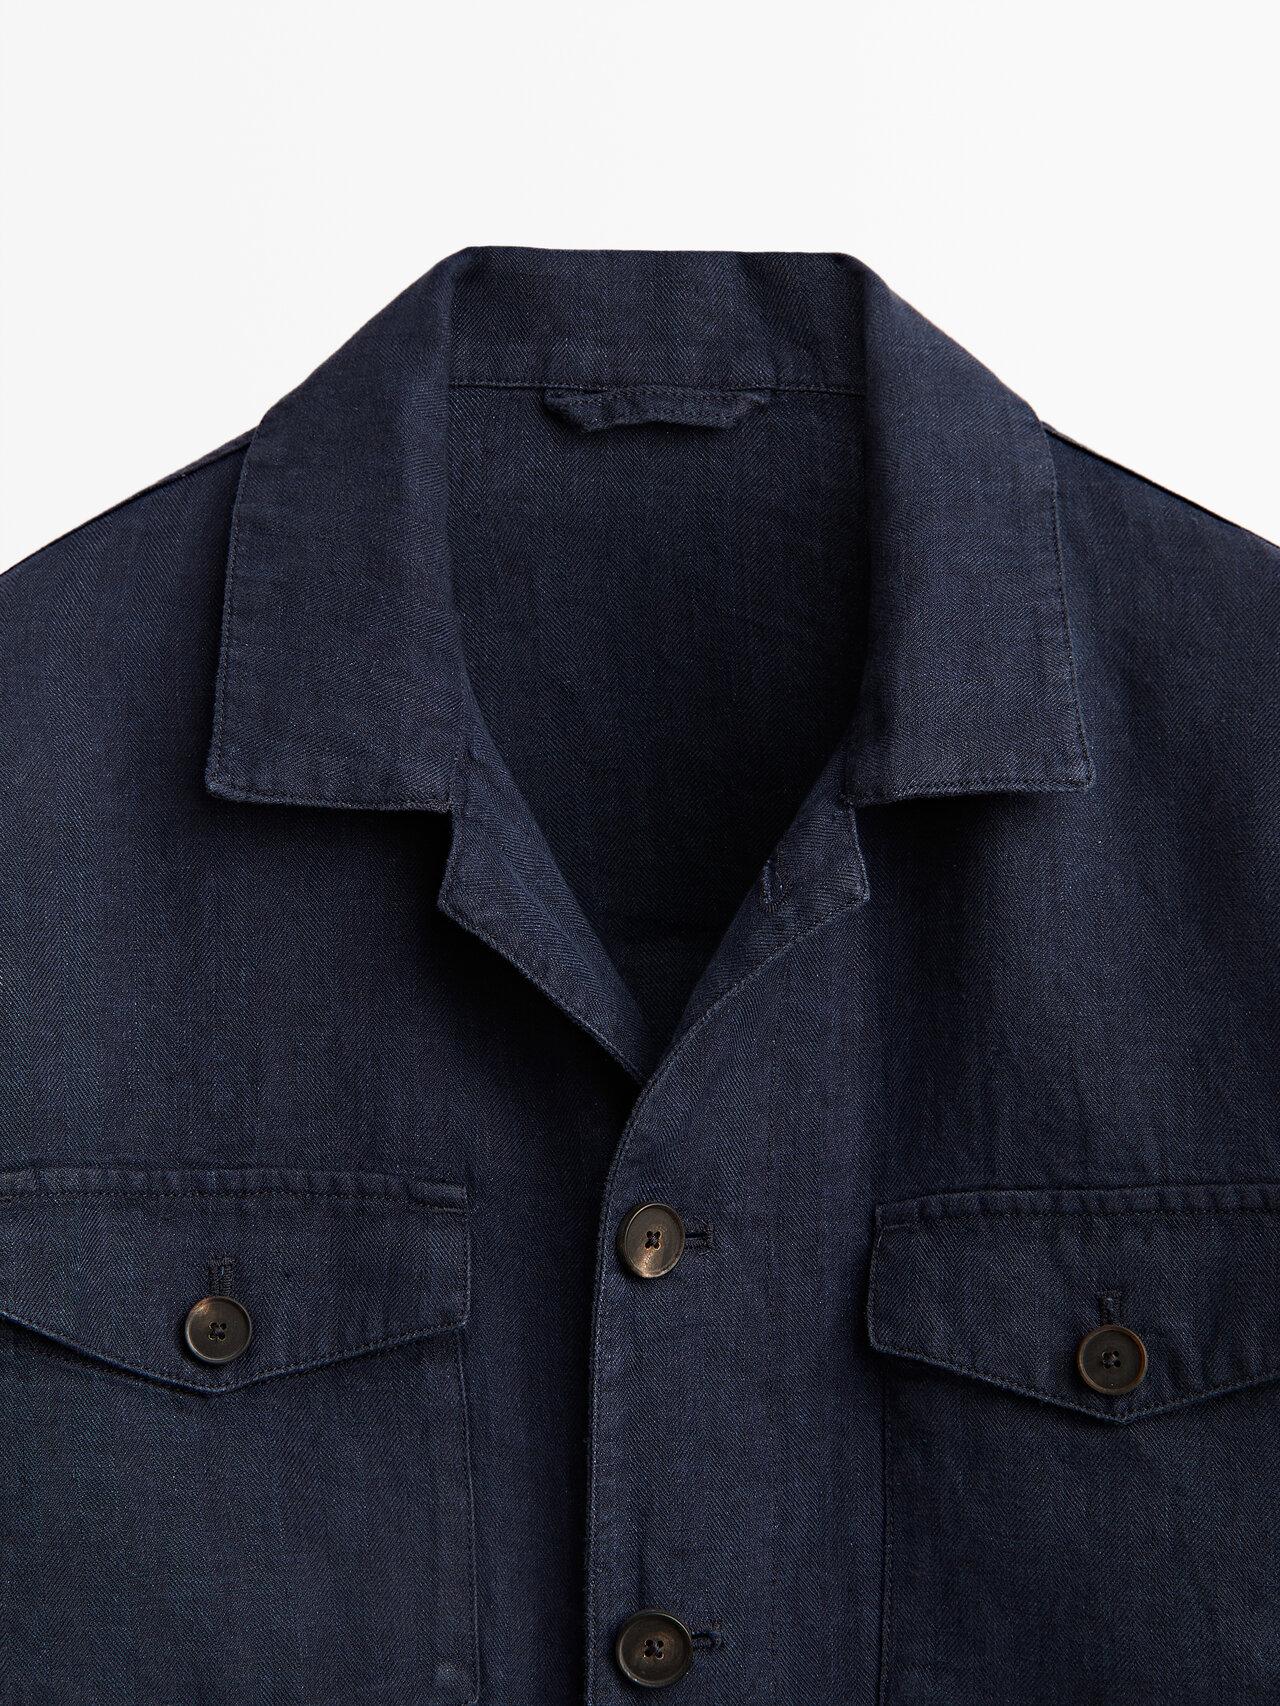 MASSIMO DUTTI 100% Linen Overshirt With Pockets in Blue for Men | Lyst